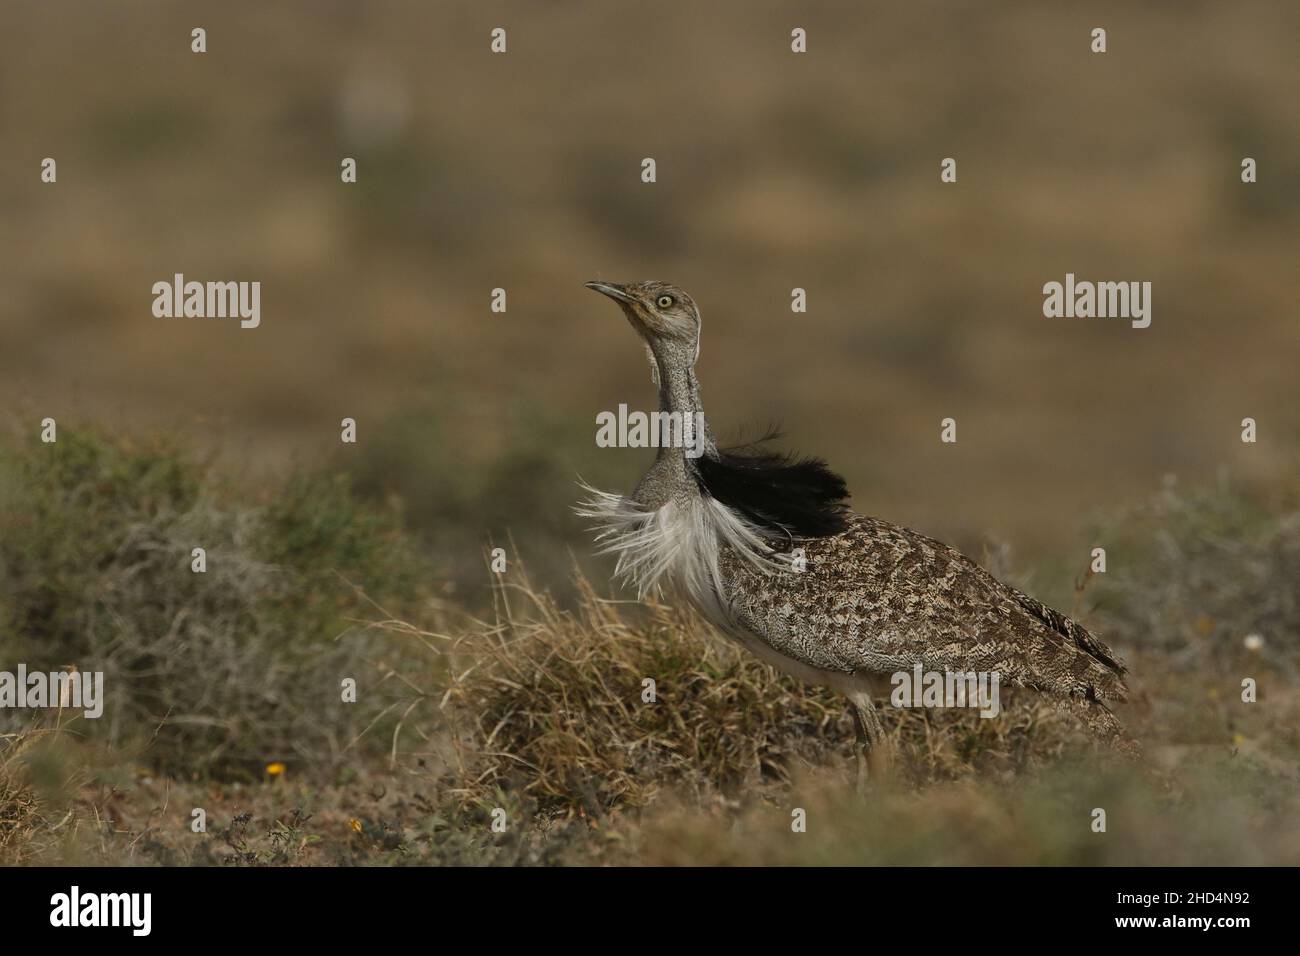 Houbara bustard on the plains of Lanzarote where they are protected by the Islands law enforcement.  On the islands they appear to be stable in number. Stock Photo